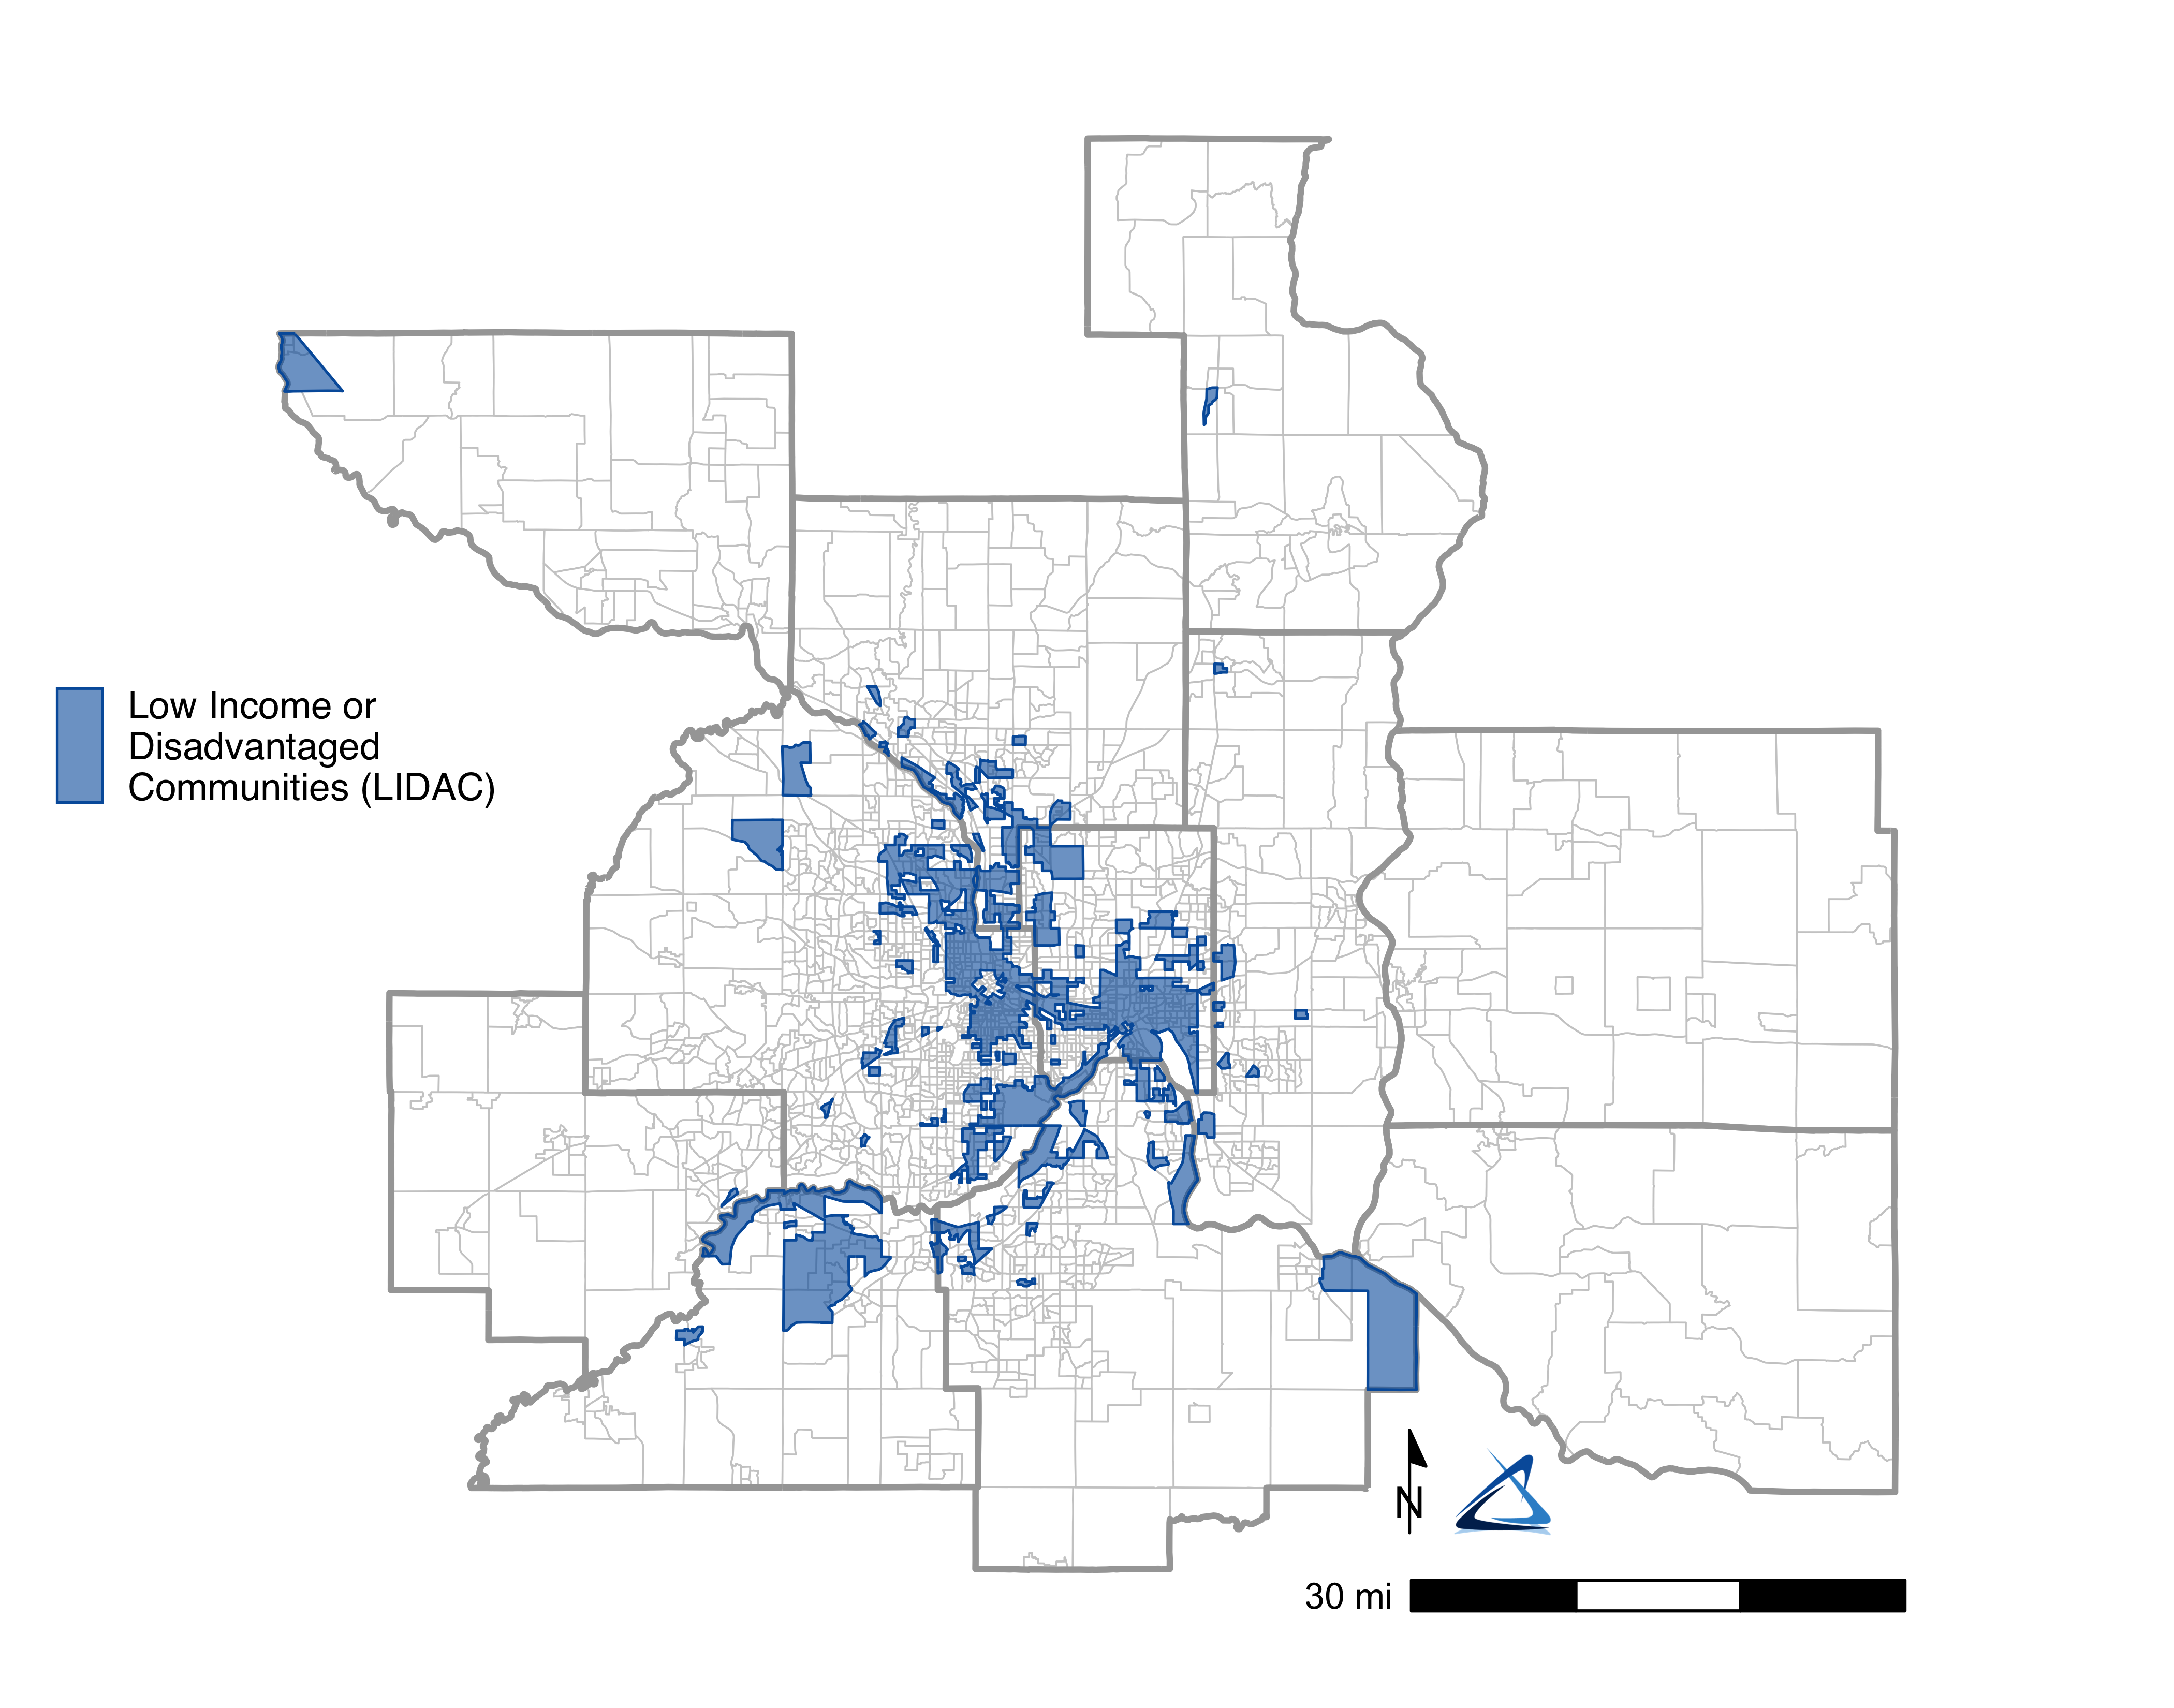 A map of the 11-county CPRG region with Low Income and Disadvantaged Community (LIDAC) census block groups colored in blue. LIDACs are found across the region but are concentrated in eastern Hennepin County and southern Ramsey County.